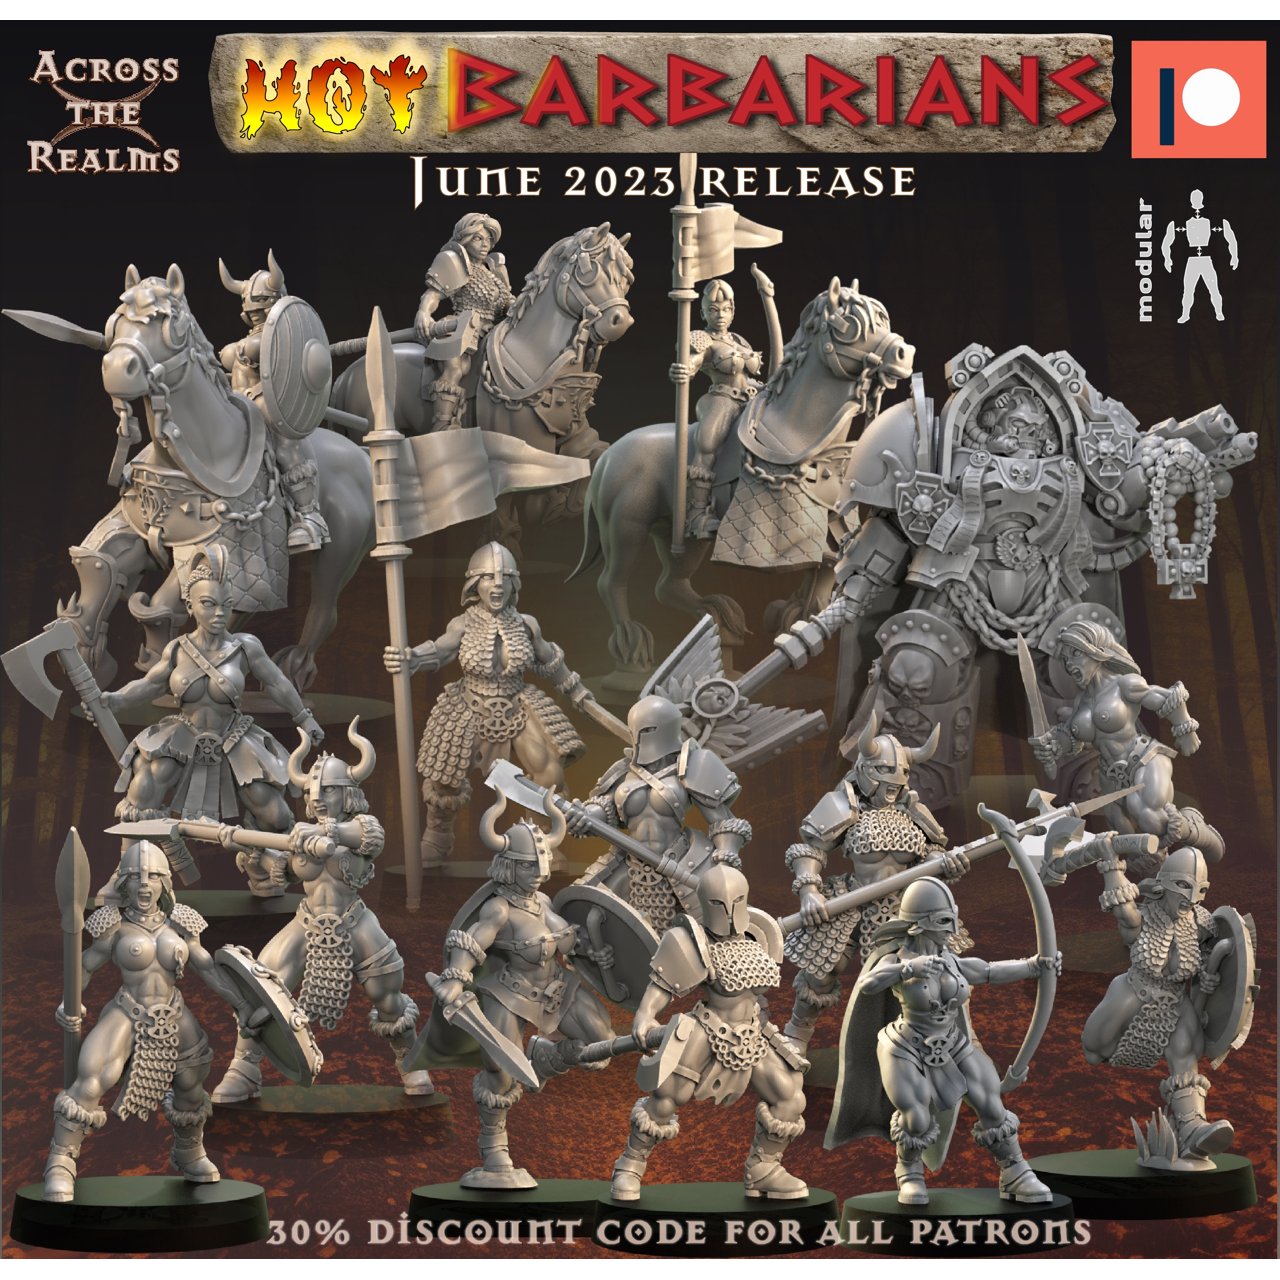 Across The Realms June 2023 (Hot Barbarians) Across the Realms  MINISTL